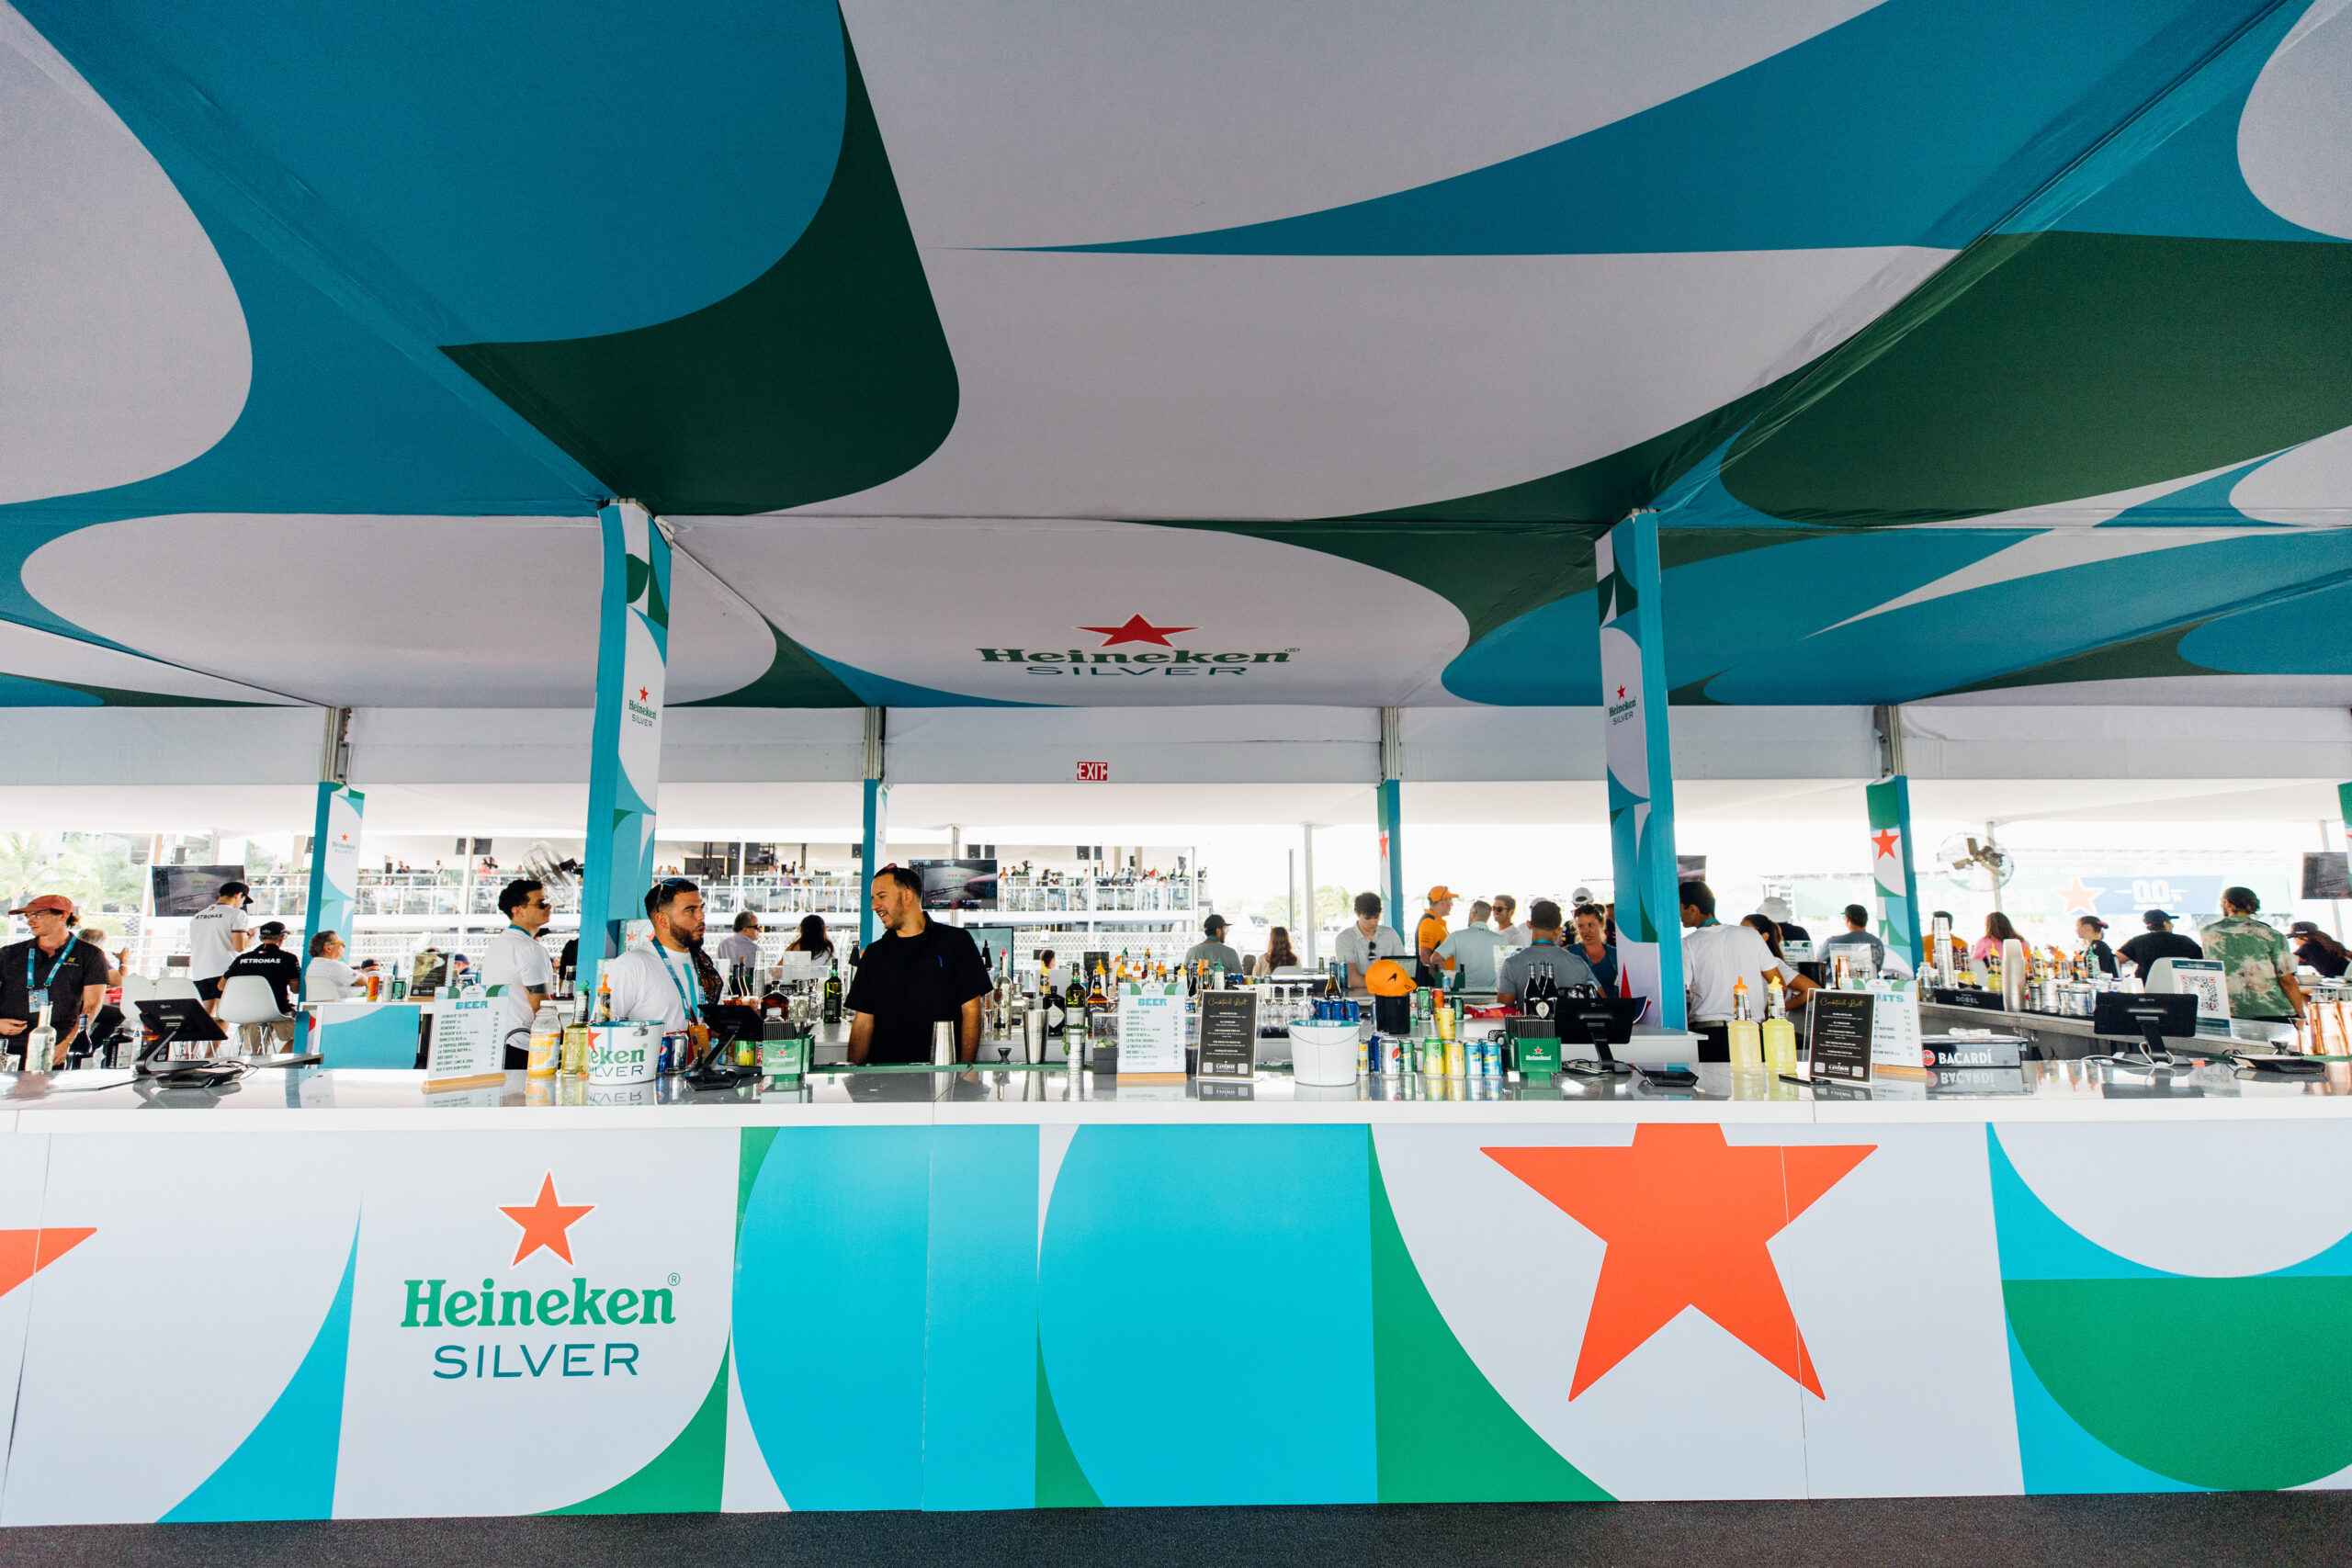 The Heineken Silver Veranda is positioned between two parallel areas of the track with panoramic views of a high-speed Turn 3 and a flat-out flowing straight.